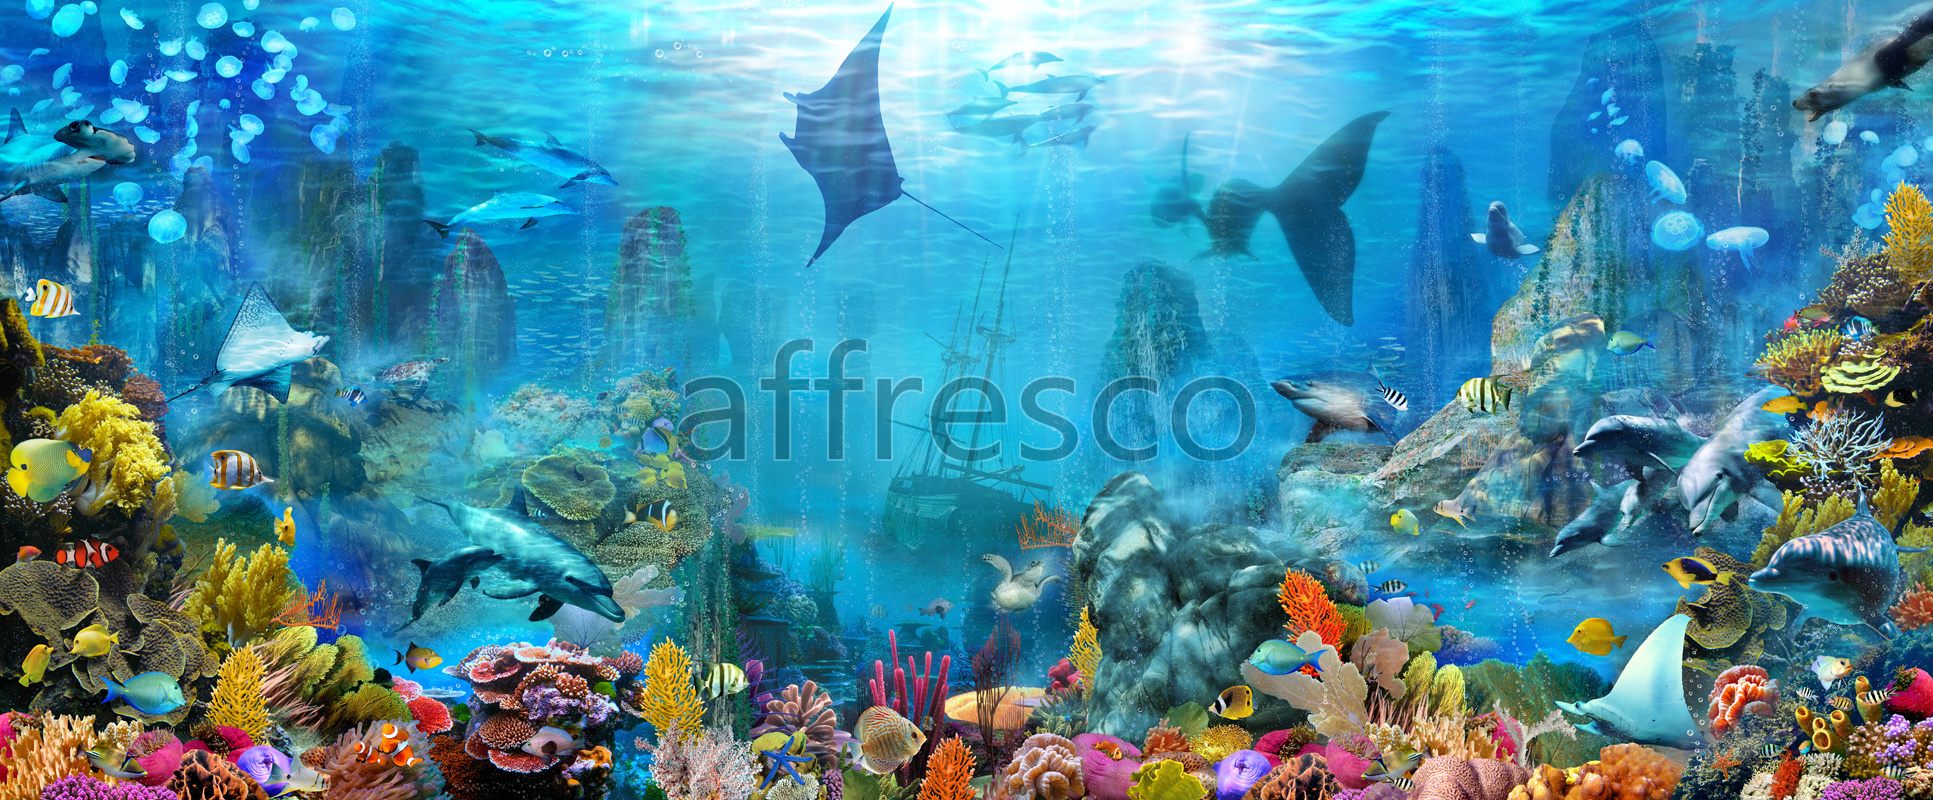 6389 | The best landscapes | Underwater panorama | Affresco Factory